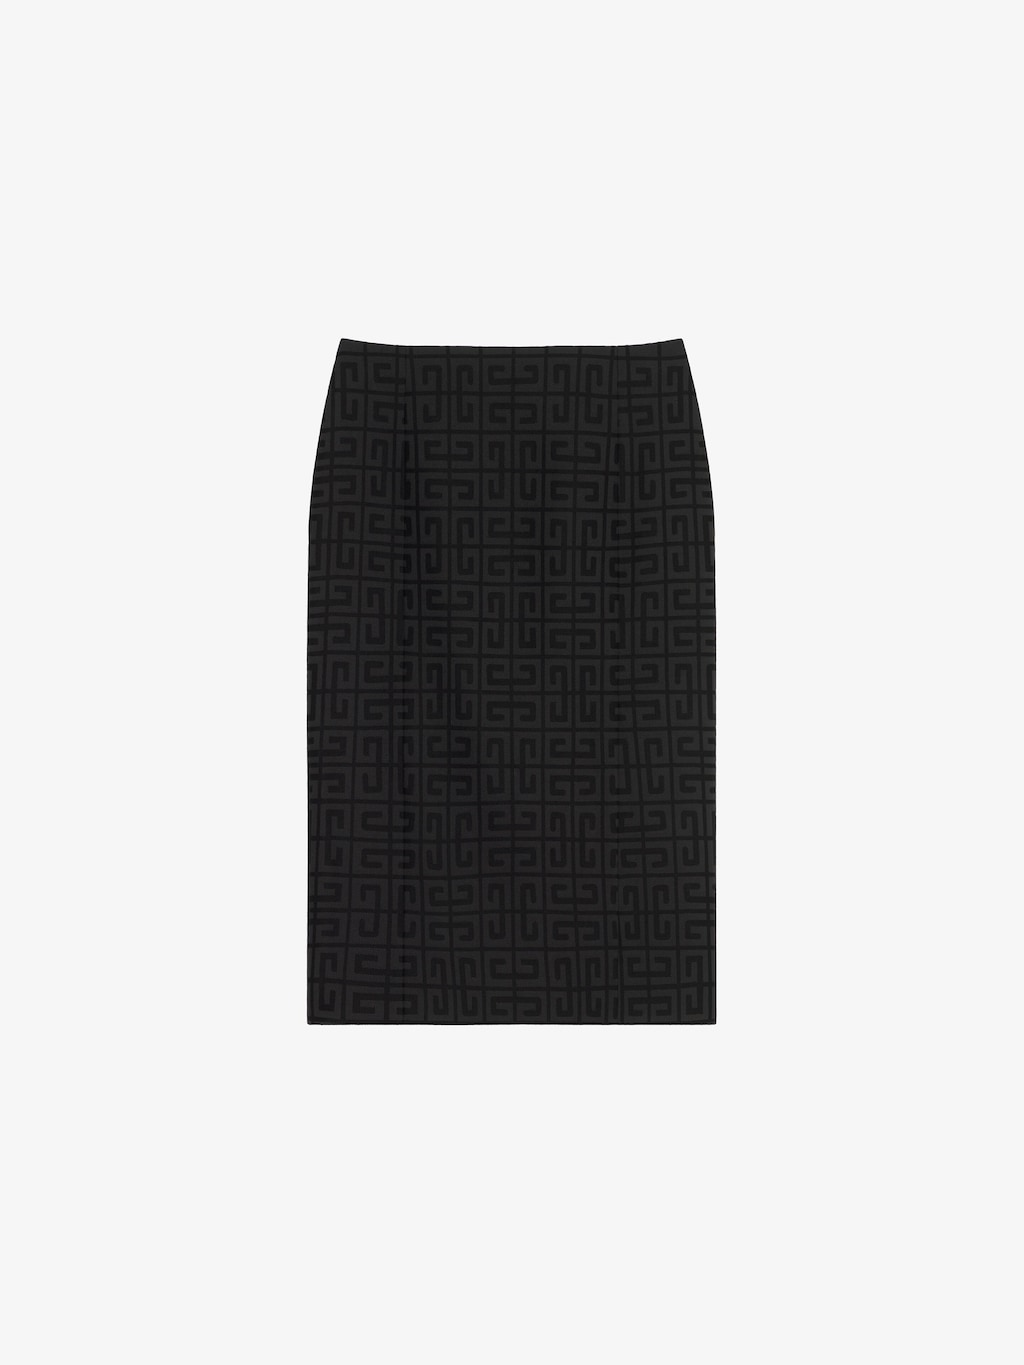 Skirts | Women Ready-to-wear | GIVENCHY Paris